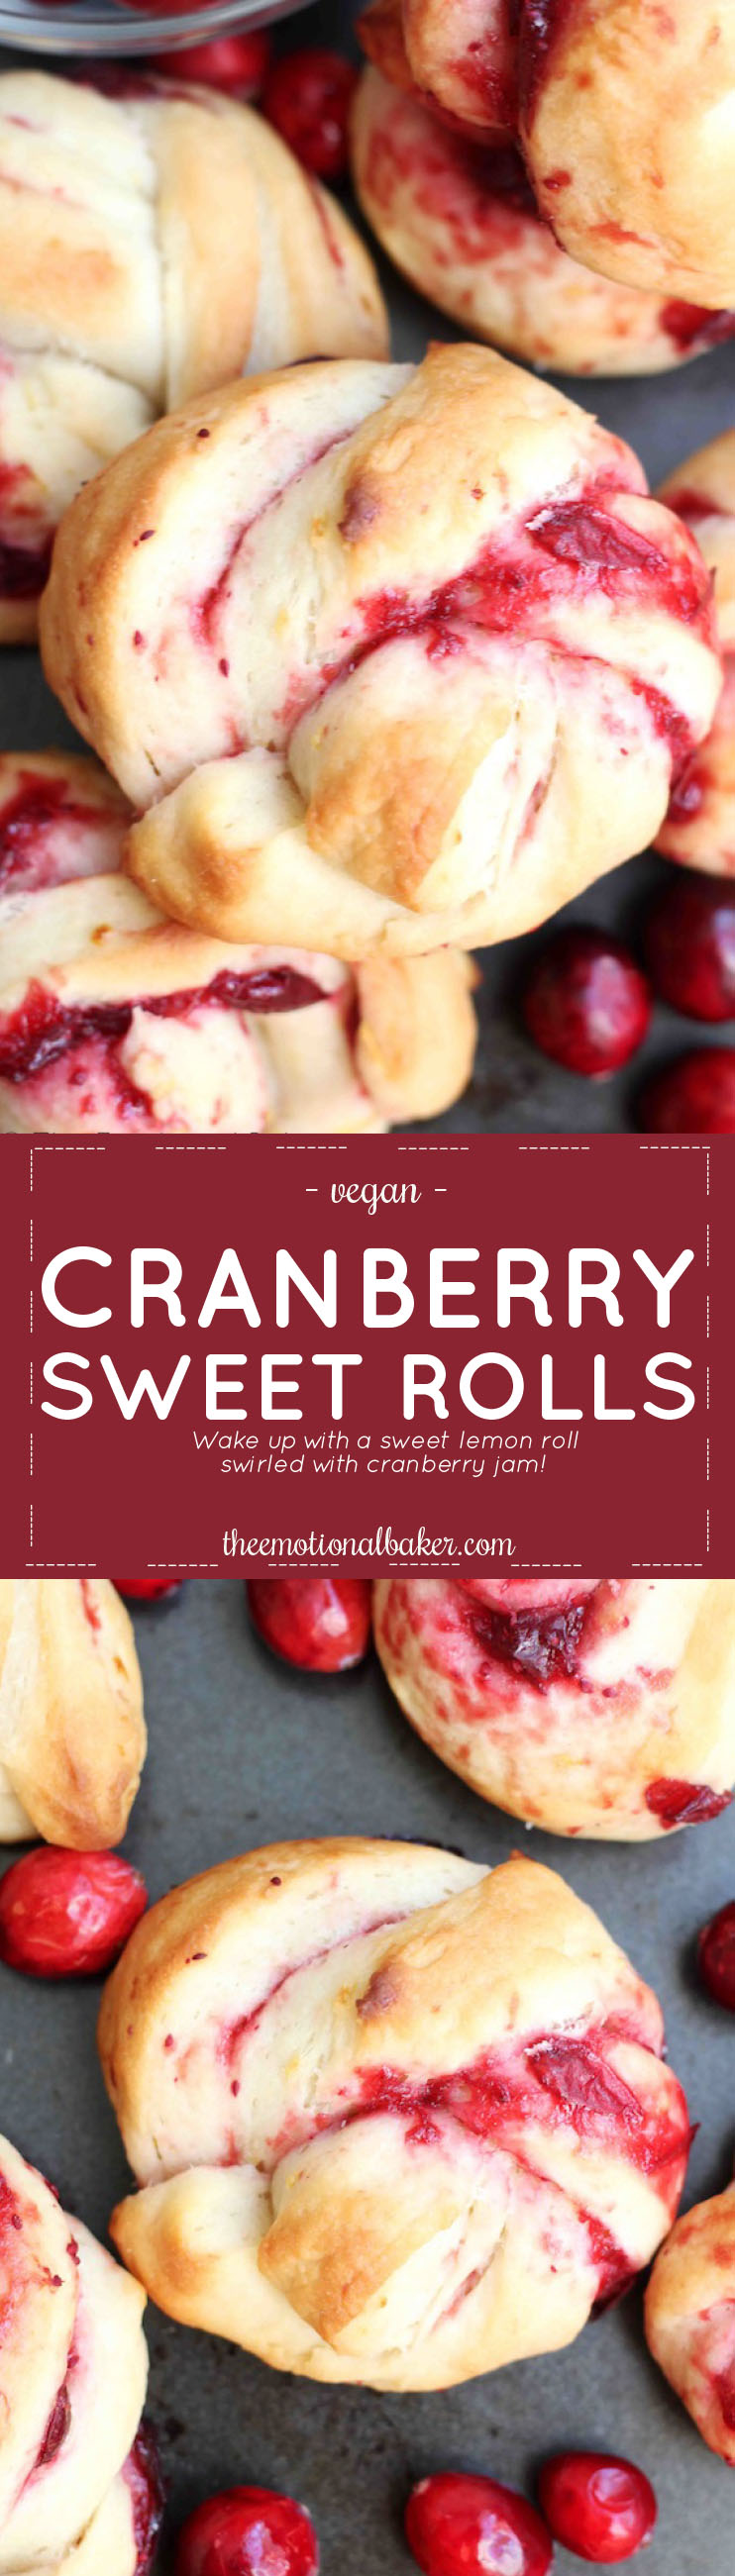 Start your day with Cranberry Sweet Rolls! This breakfast bun features a soft lemon dough that is paired with homemade cranberry jam.